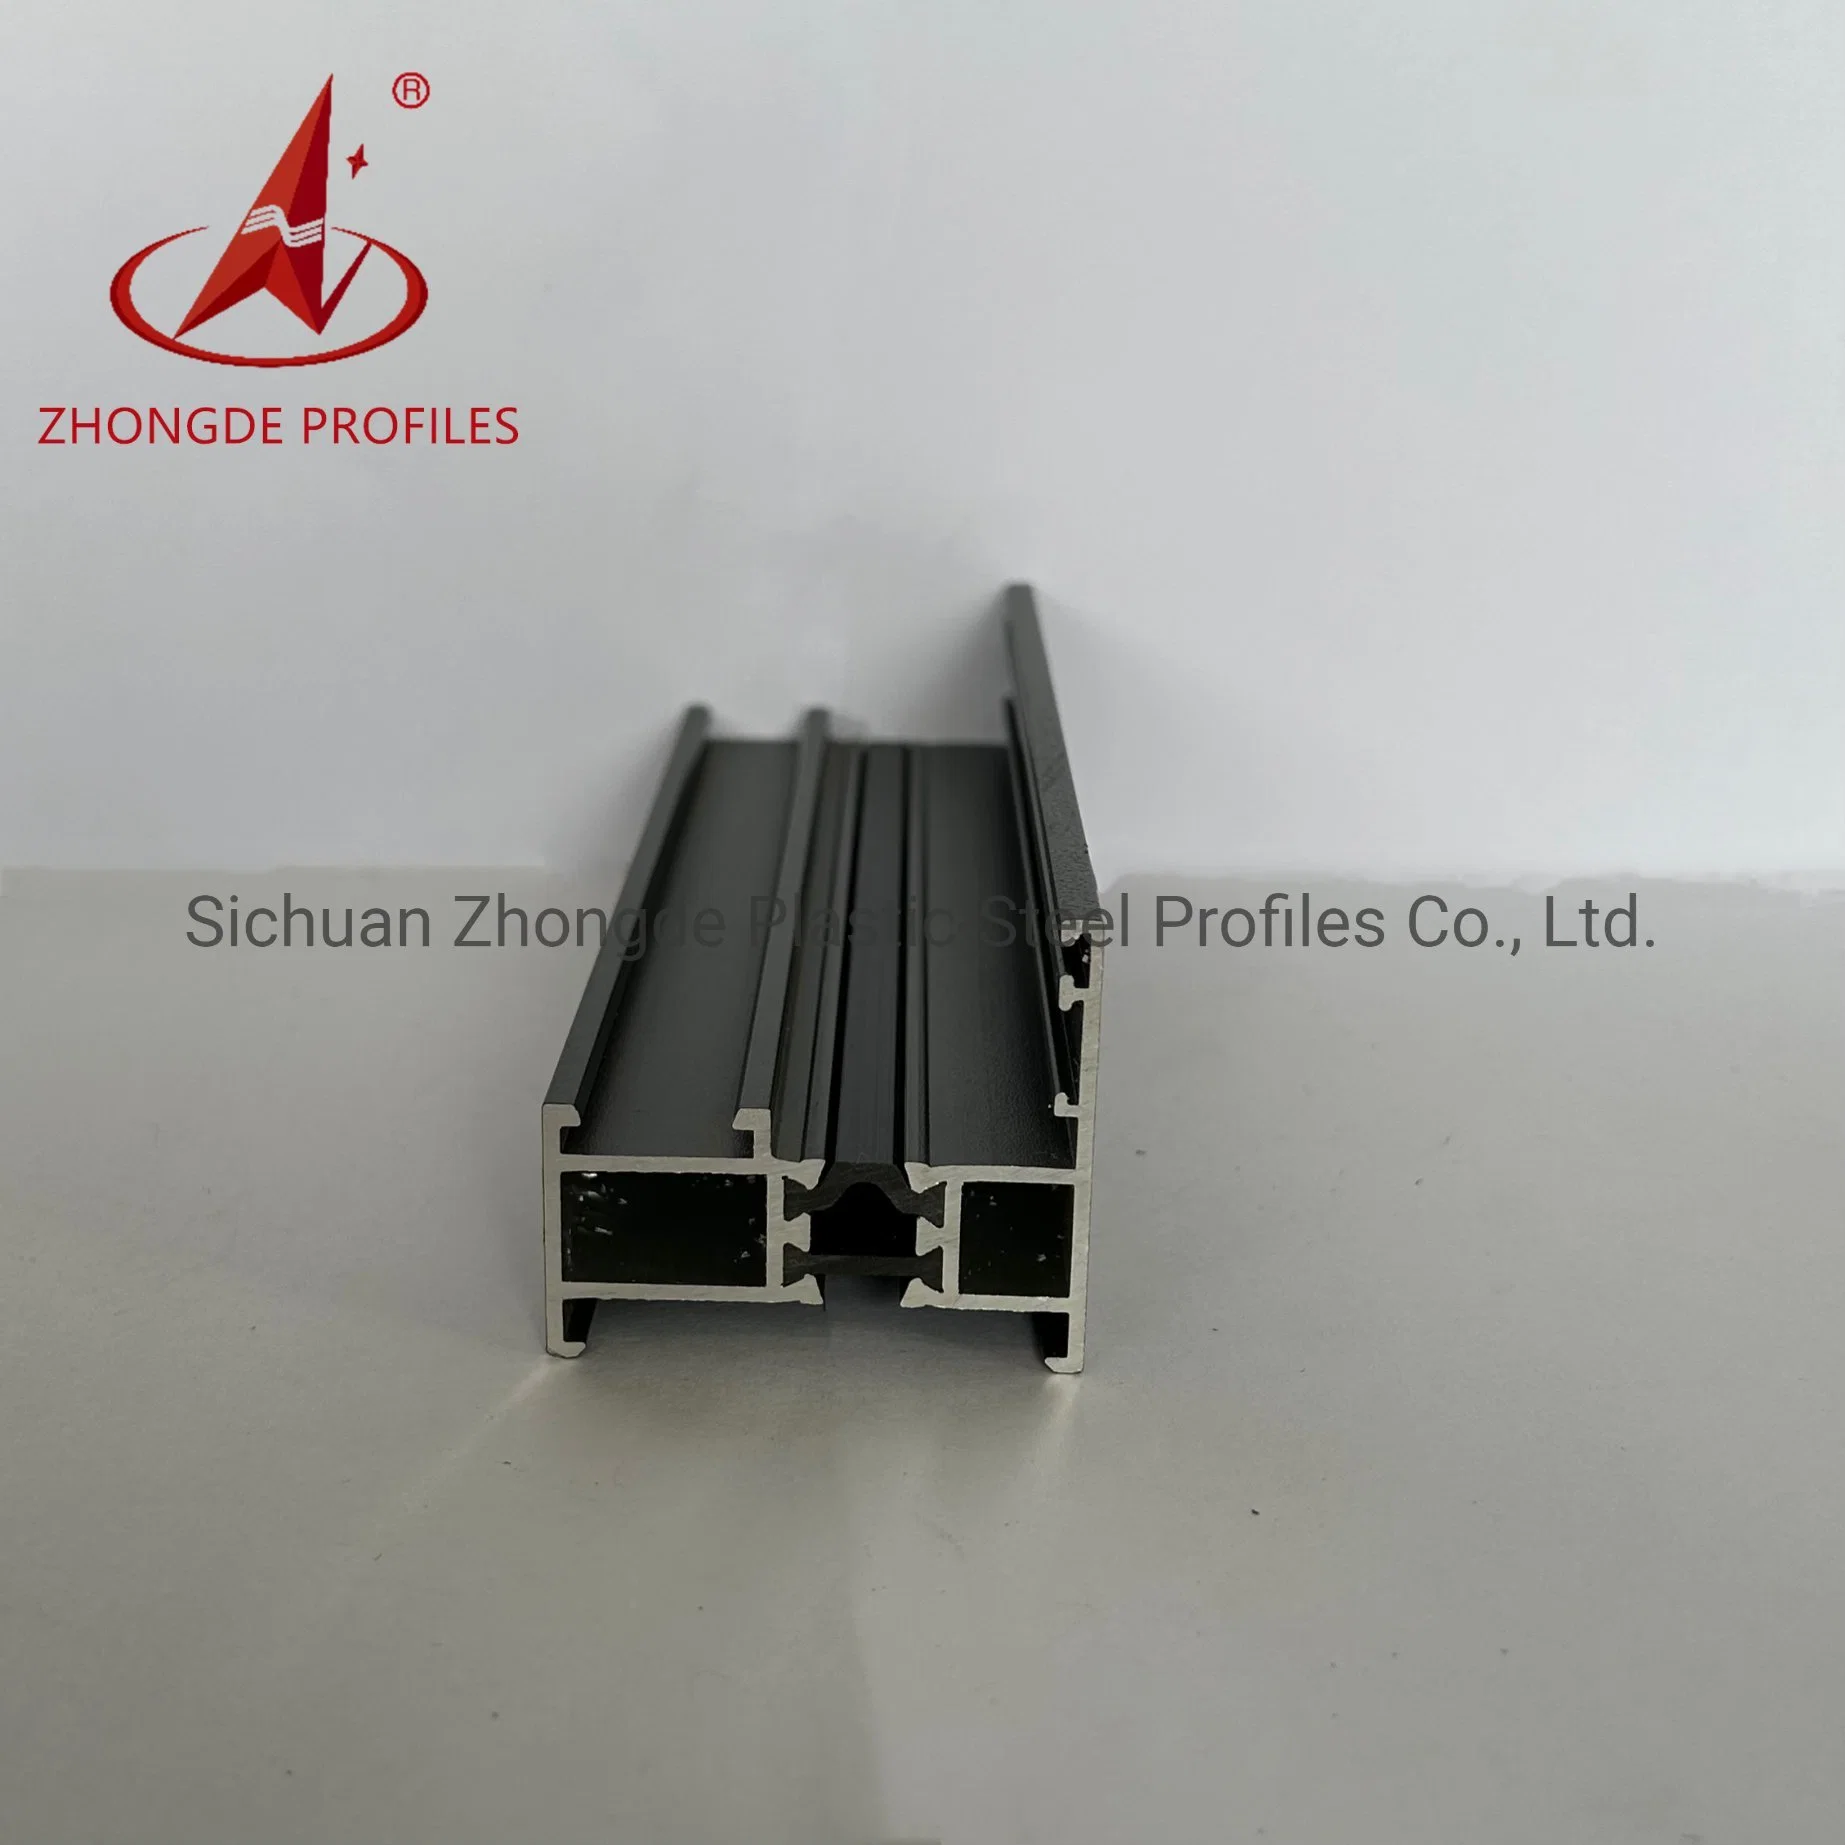 Zhongde High-End Excellent Quality Durable OEM/ODM Supported Low Maintenance Heat Insulation Noise Proof 6061 Extrusion Aluminum Profiles for Windows&Door